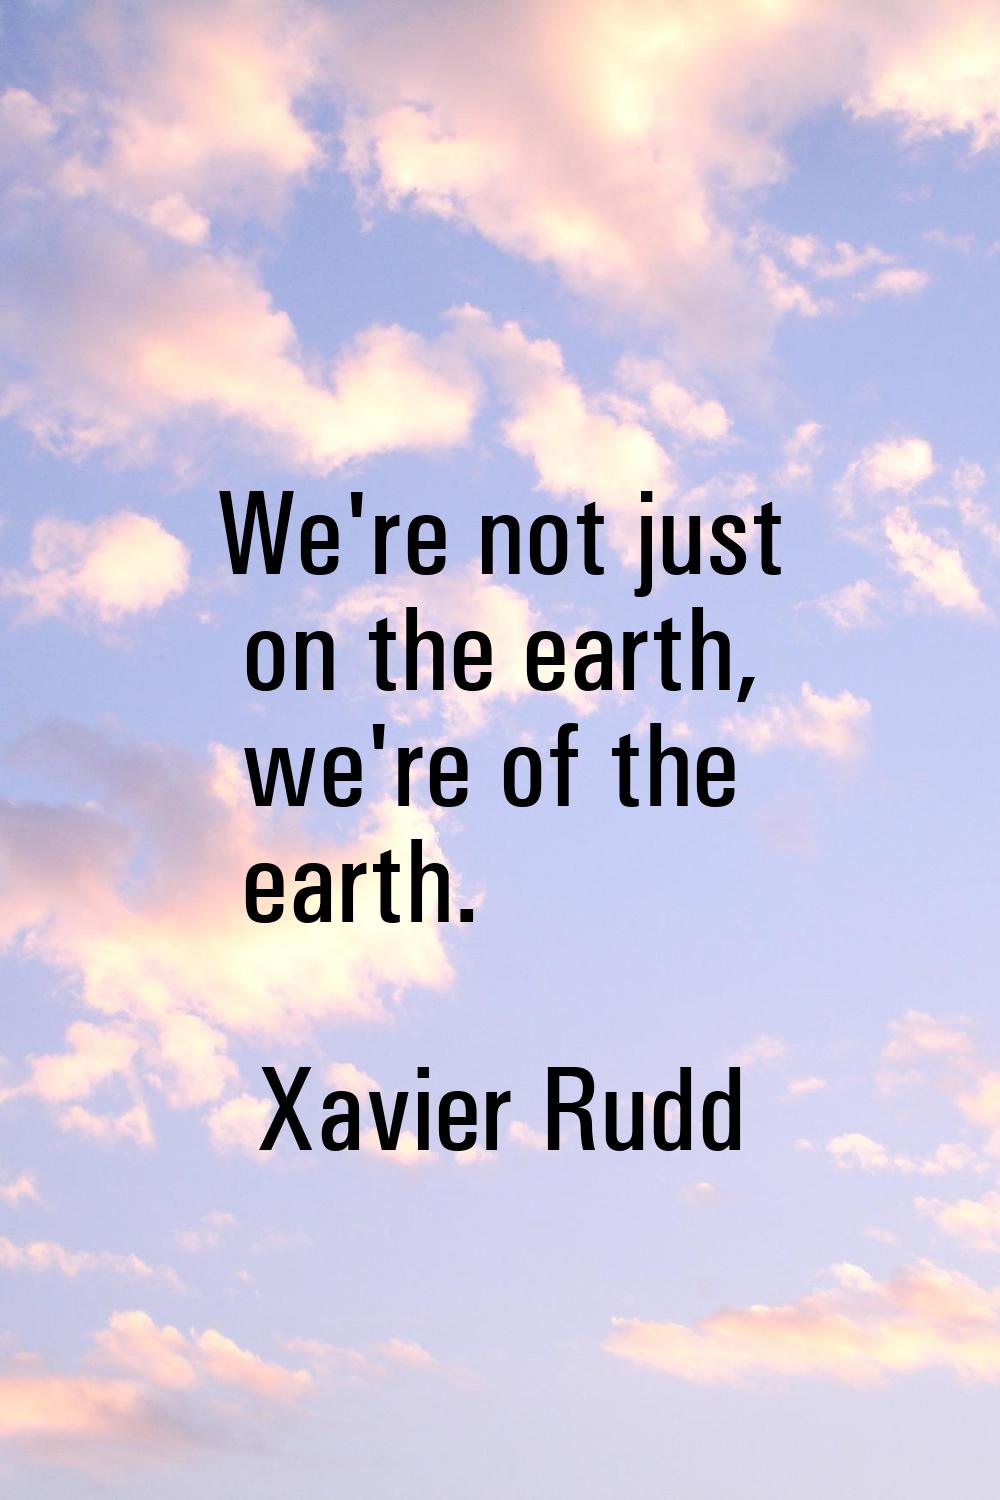 We're not just on the earth, we're of the earth.